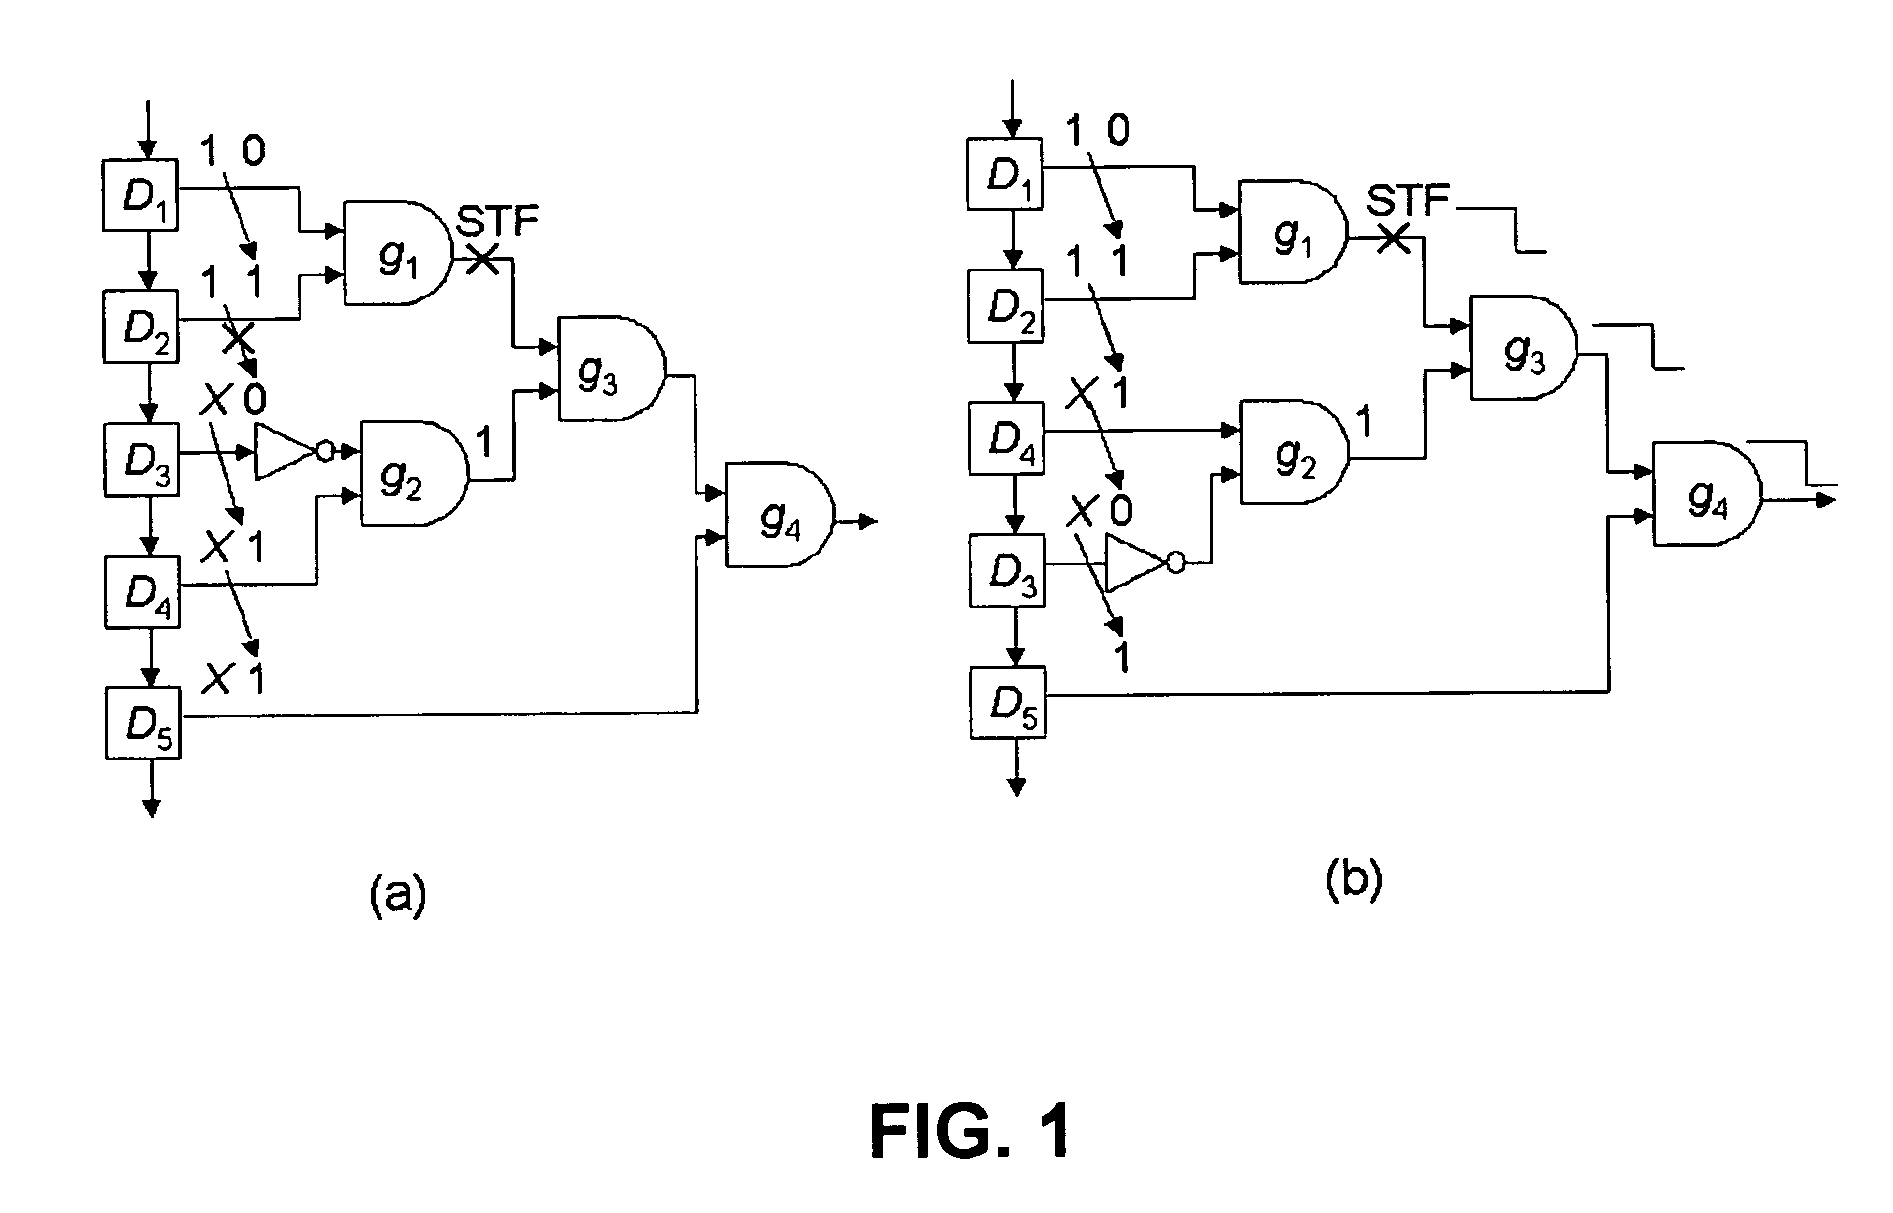 Restricted scan reordering technique to enhance delay fault coverage